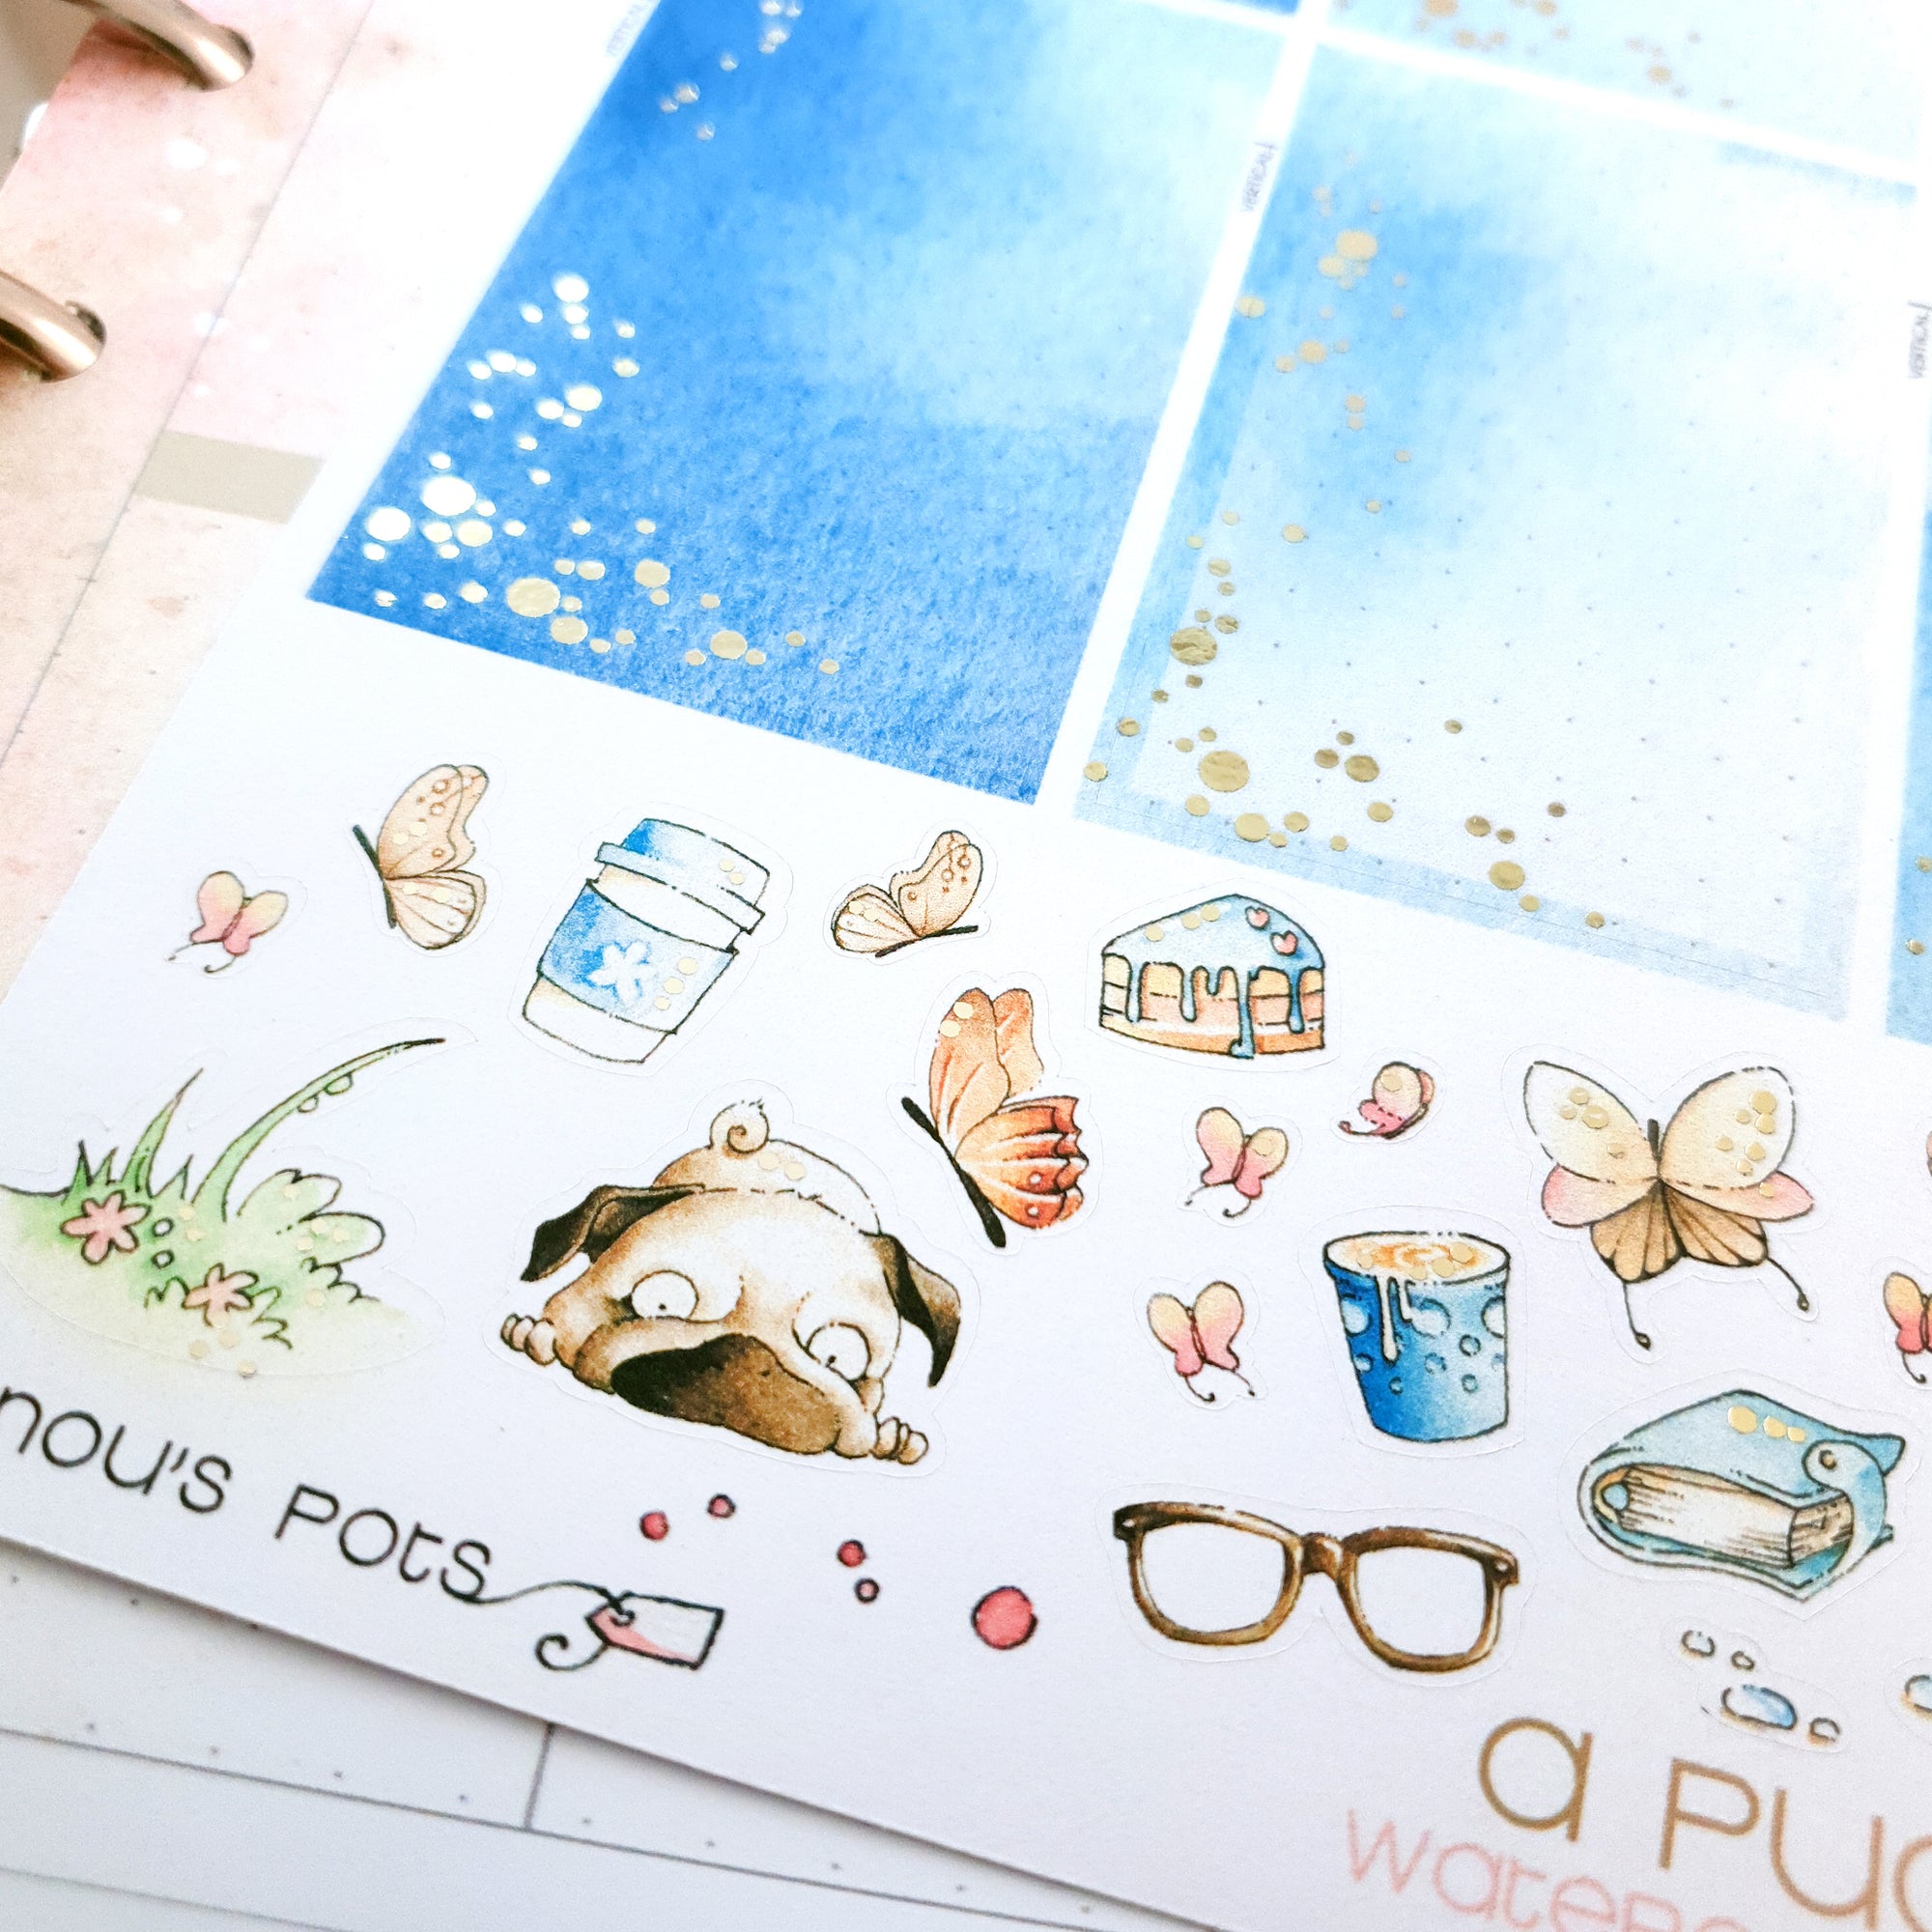 A Pug&#39;s Life - Watercolor Planner Stickers - Foiled 1,5’’ Fullboxes Blue ✨